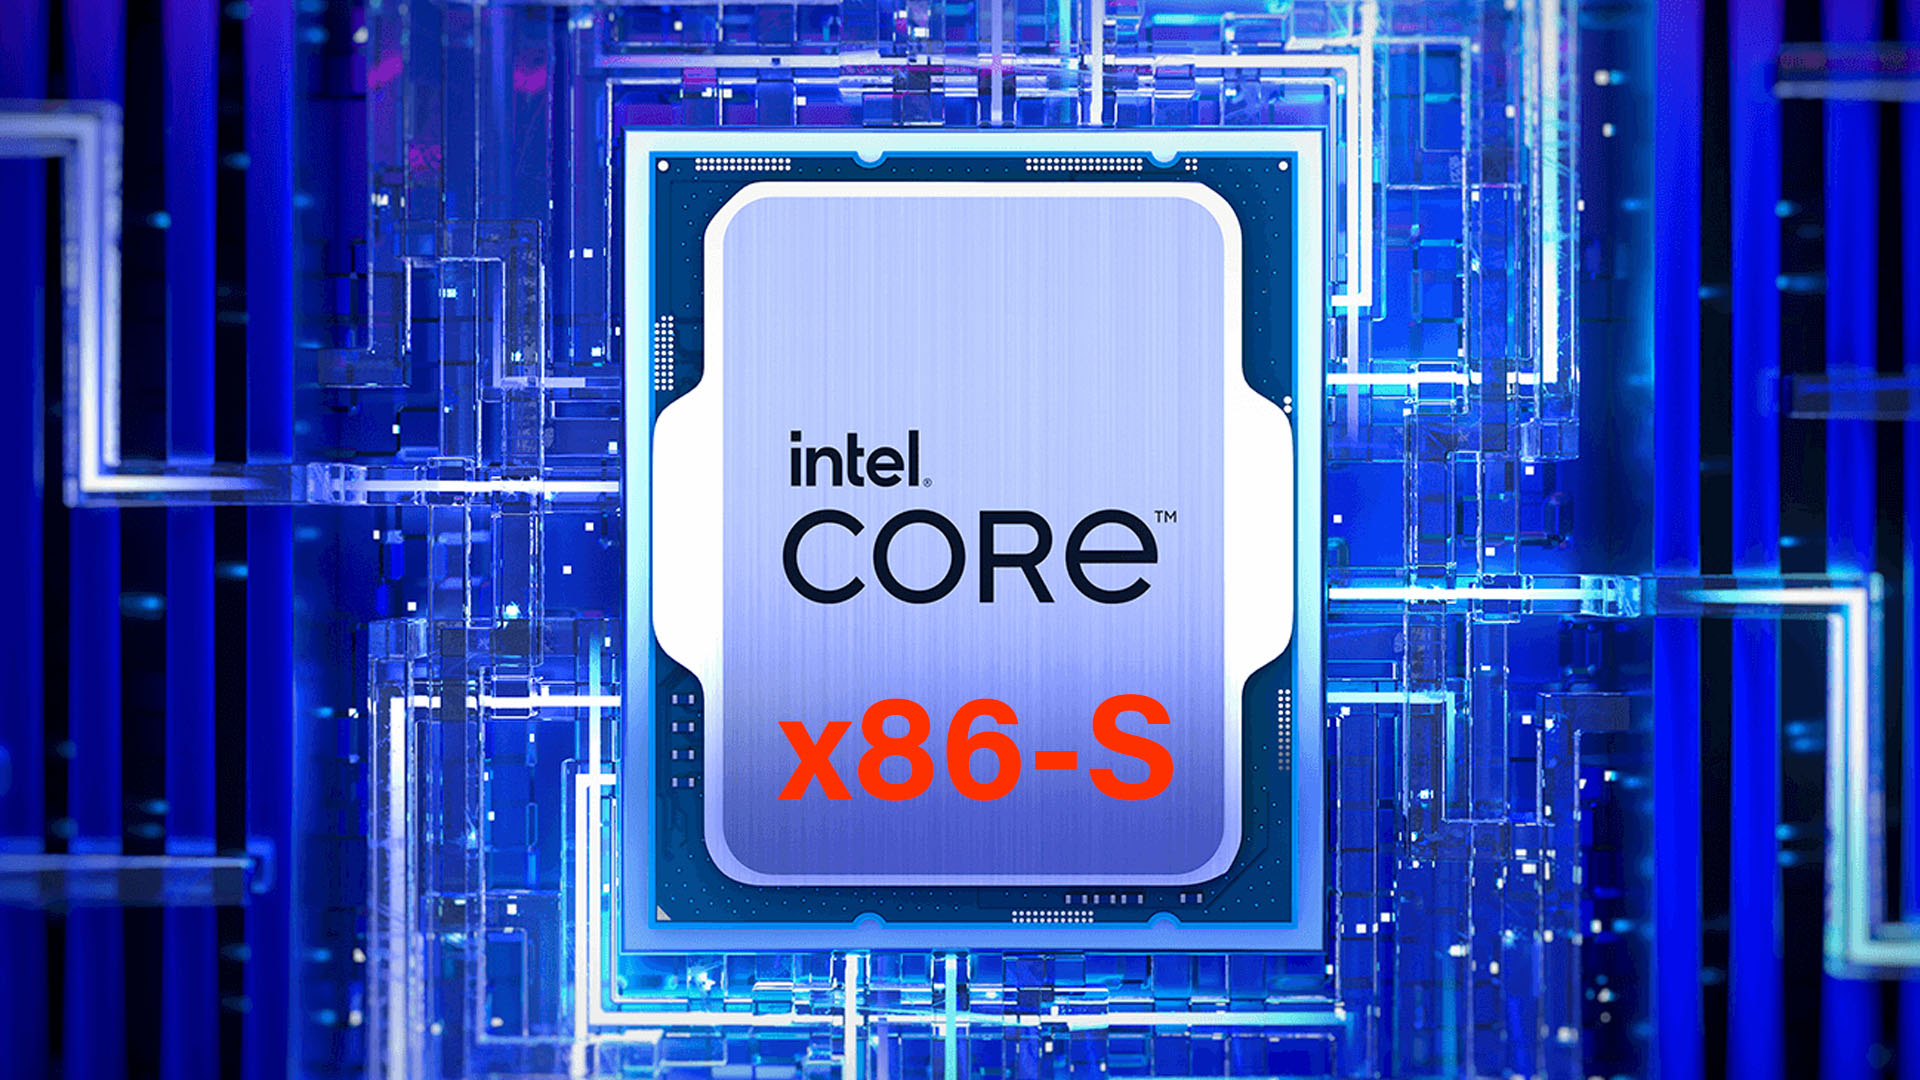 Intel proposes ditching 32-bit support with new x86-S architecture